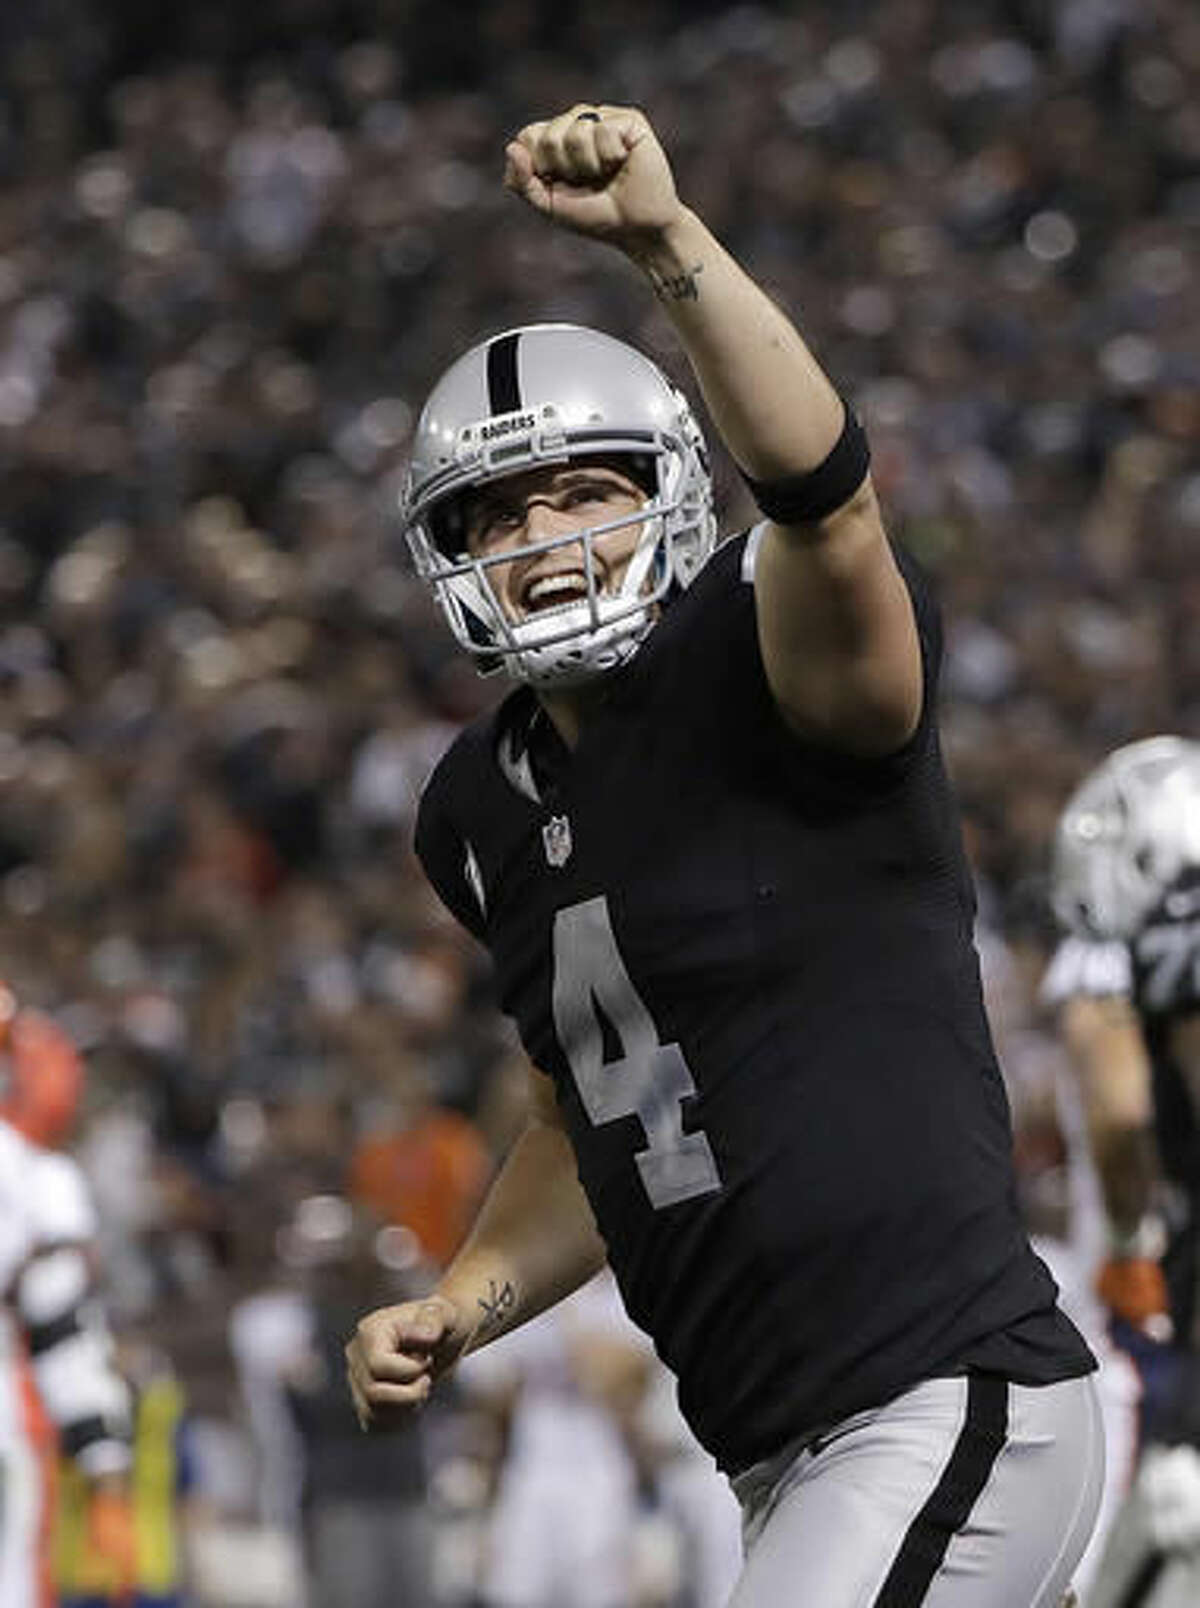 Oakland Raiders quarterback Derek Carr (4) celebrates after a touchdown run by Latavius Murray during the second half of an NFL football game against the Denver Broncos in Oakland, Calif., Sunday, Nov. 6, 2016. (AP Photo/Marcio Jose Sanchez)